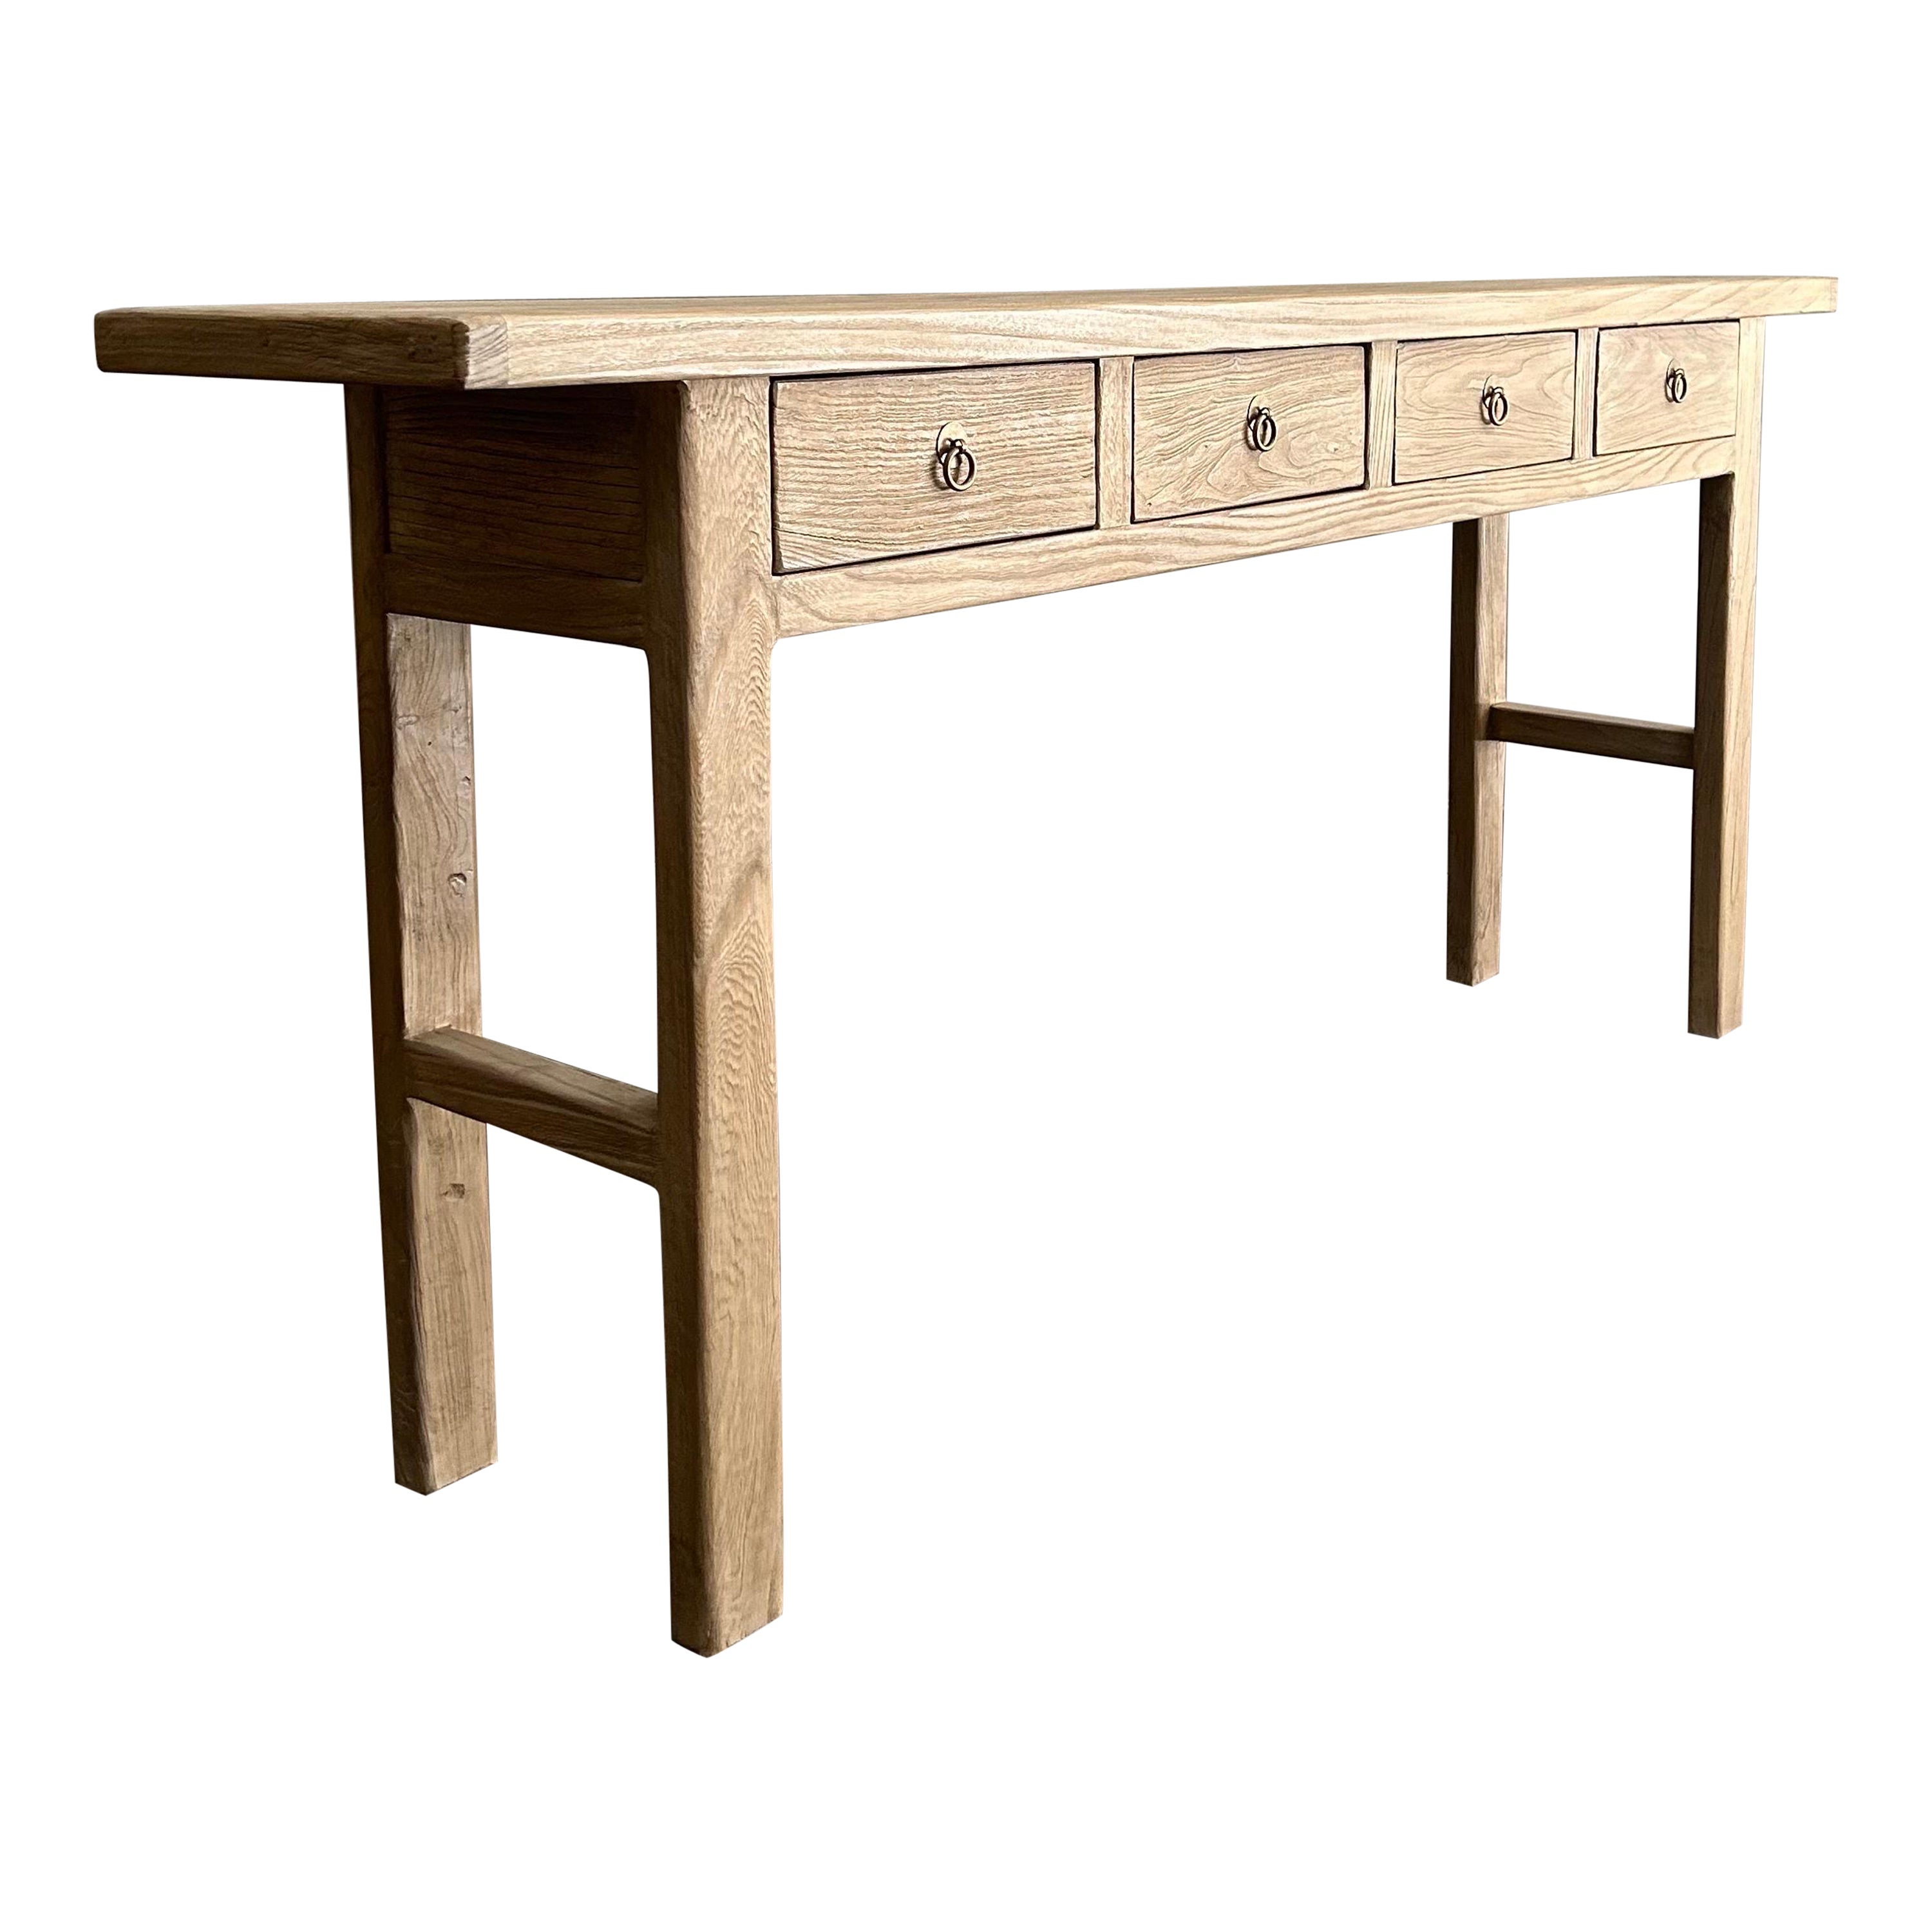 Reclaimed Elm Wood Console Table with Drawers 72" For Sale